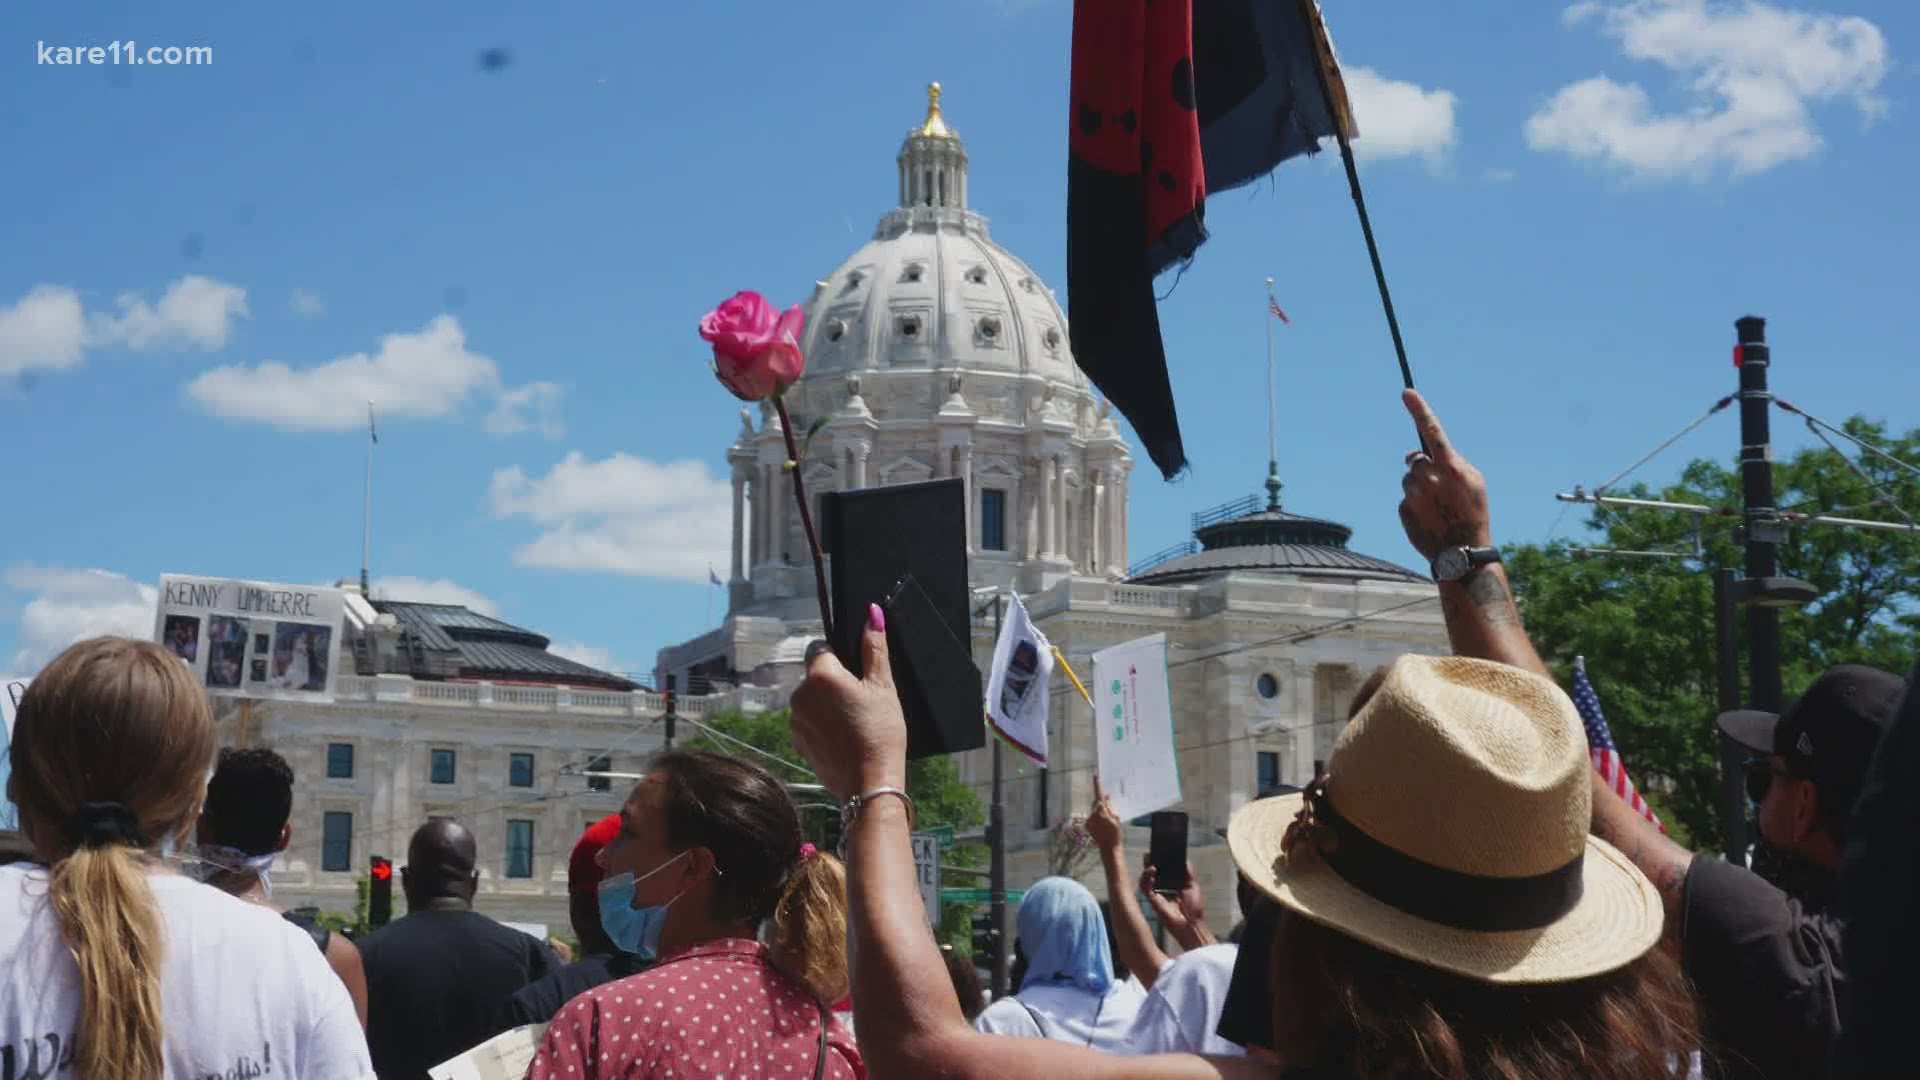 Nearly 1,000 people protested the death of George Floyd and others in St. Paul on Sunday.